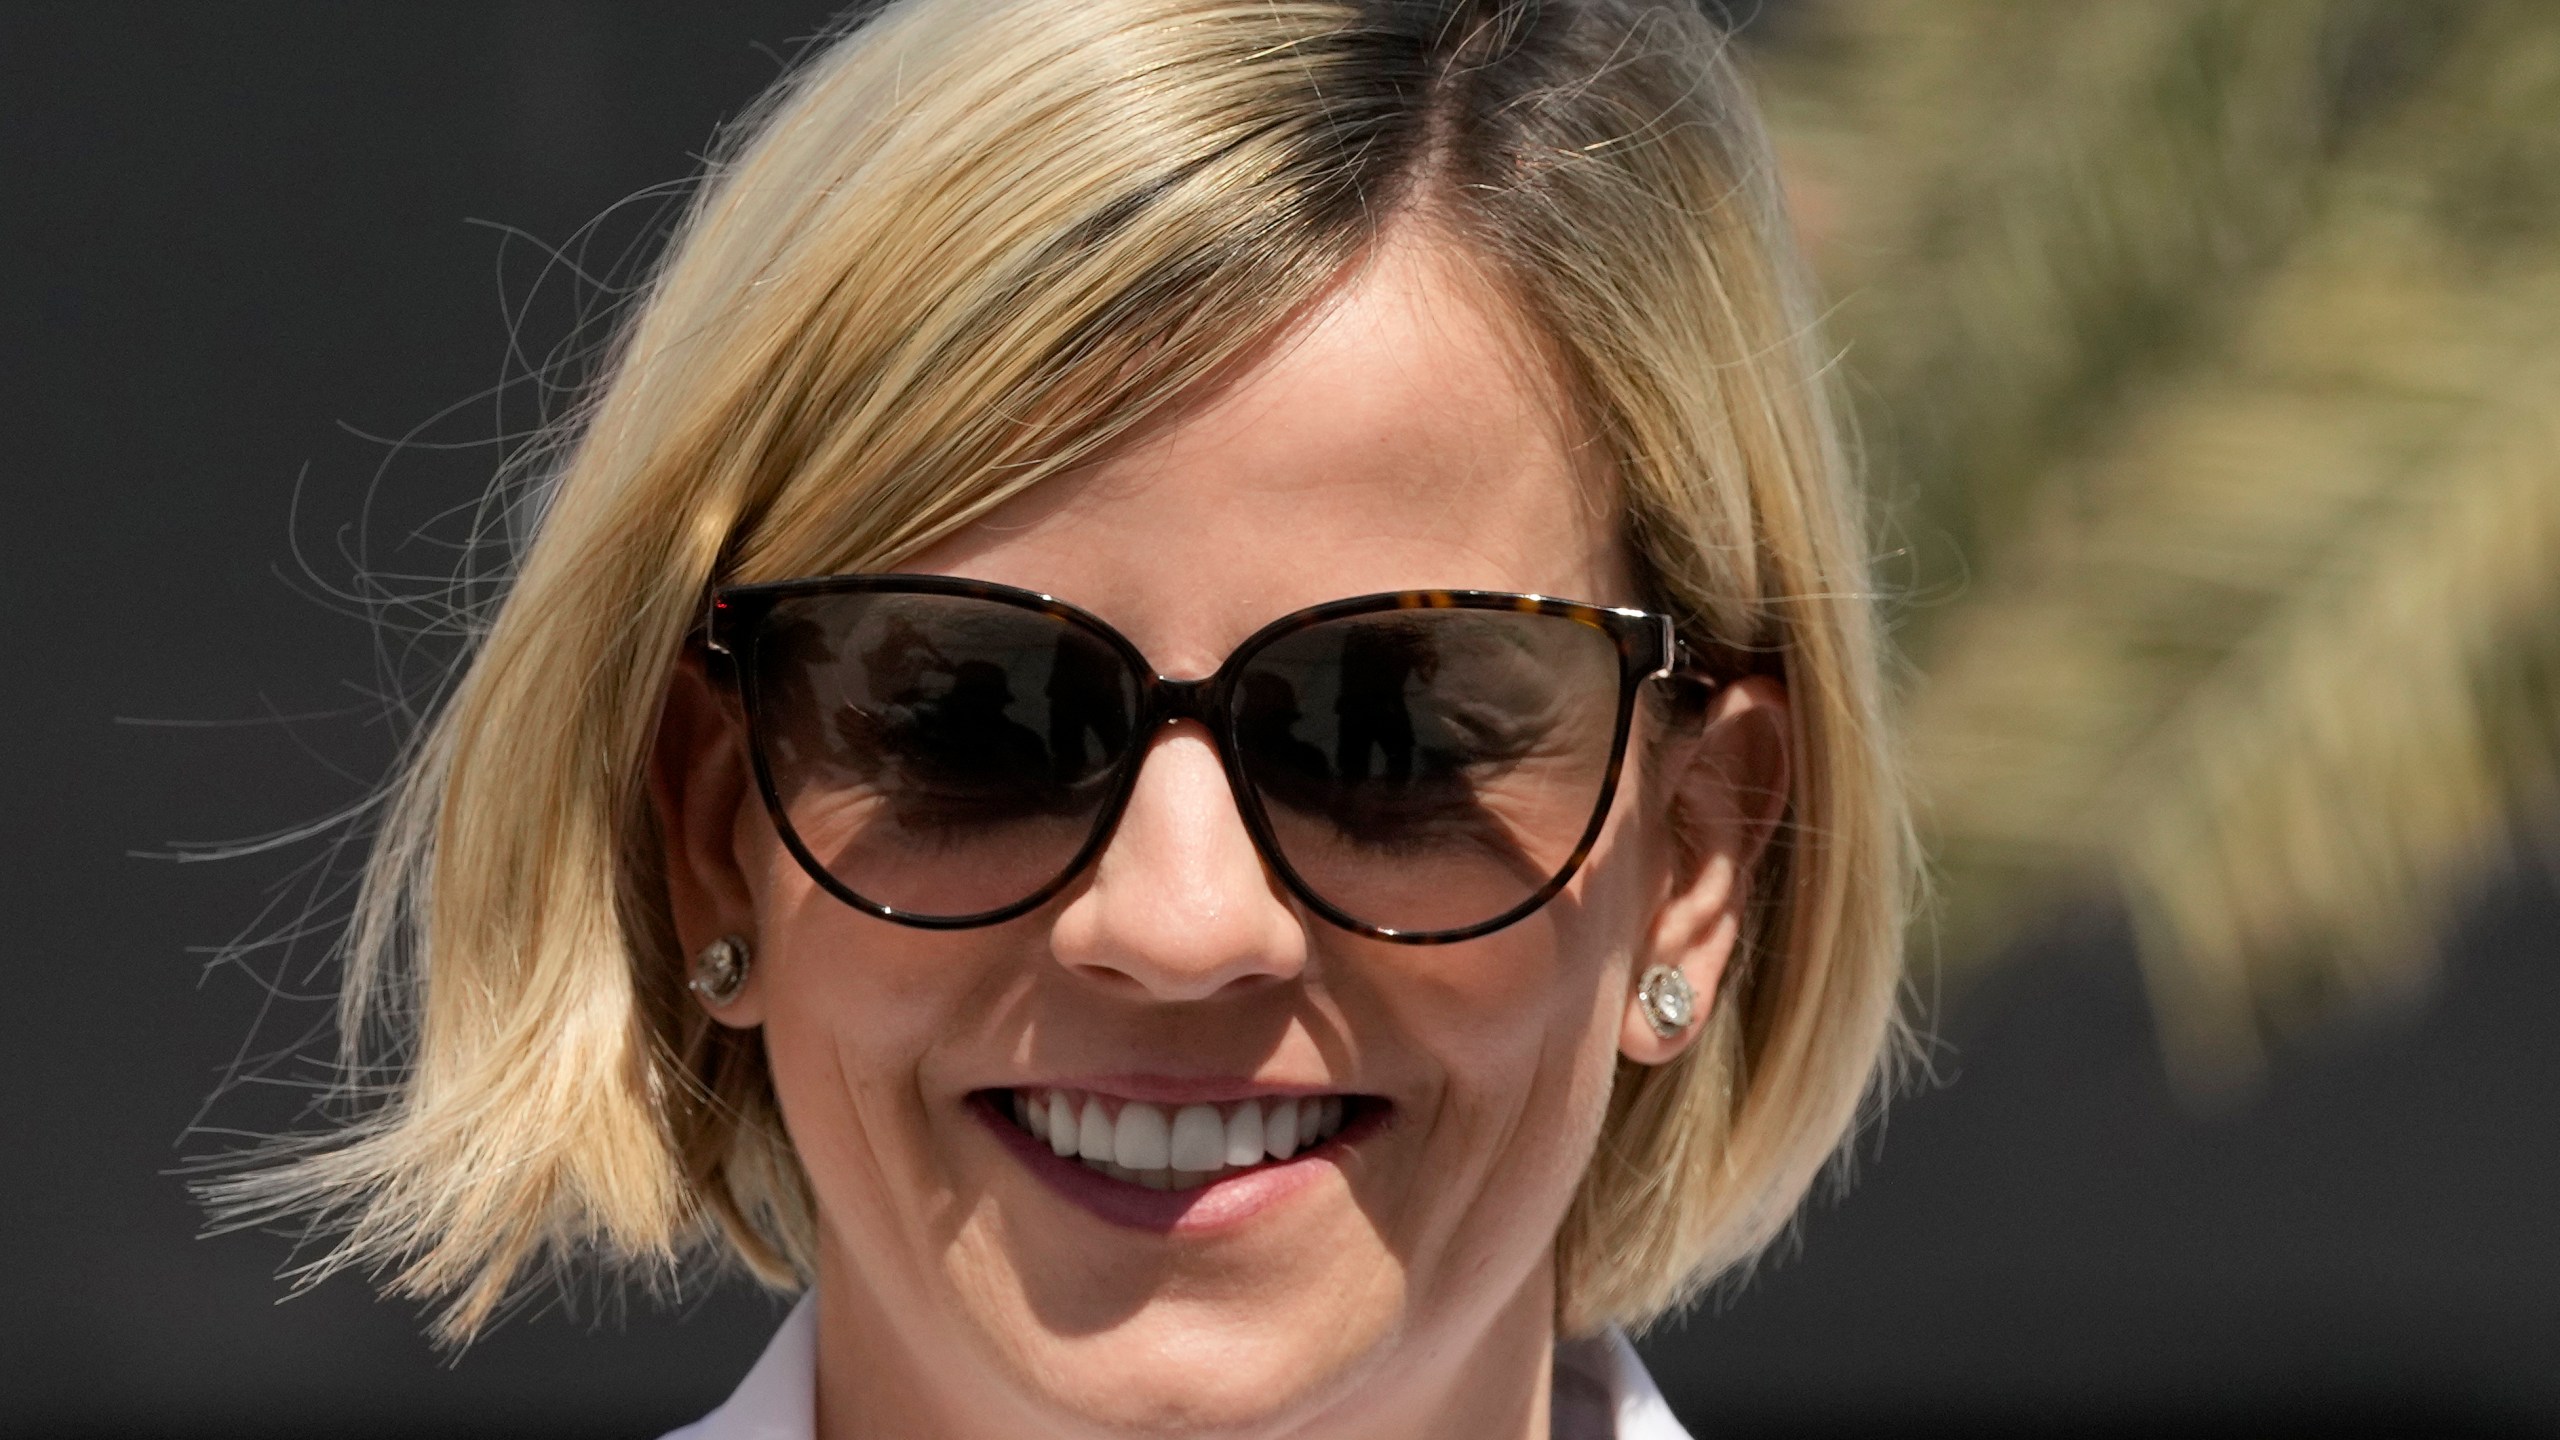 FILE - Susie Wolff, current managing director of the F1 Academy arrives at the Bahrain International Circuit in Sakhir, Bahrain, Thursday, March 2, 2023. Susie Wolff, the wife of Mercedes team boss Toto Wolff said Wednesday, March 20, 2024 she has filed a criminal complaint in the French courts “in relation to statements made about me” by Formula 1's governing body.(AP Photo/Frank Augstein, File)